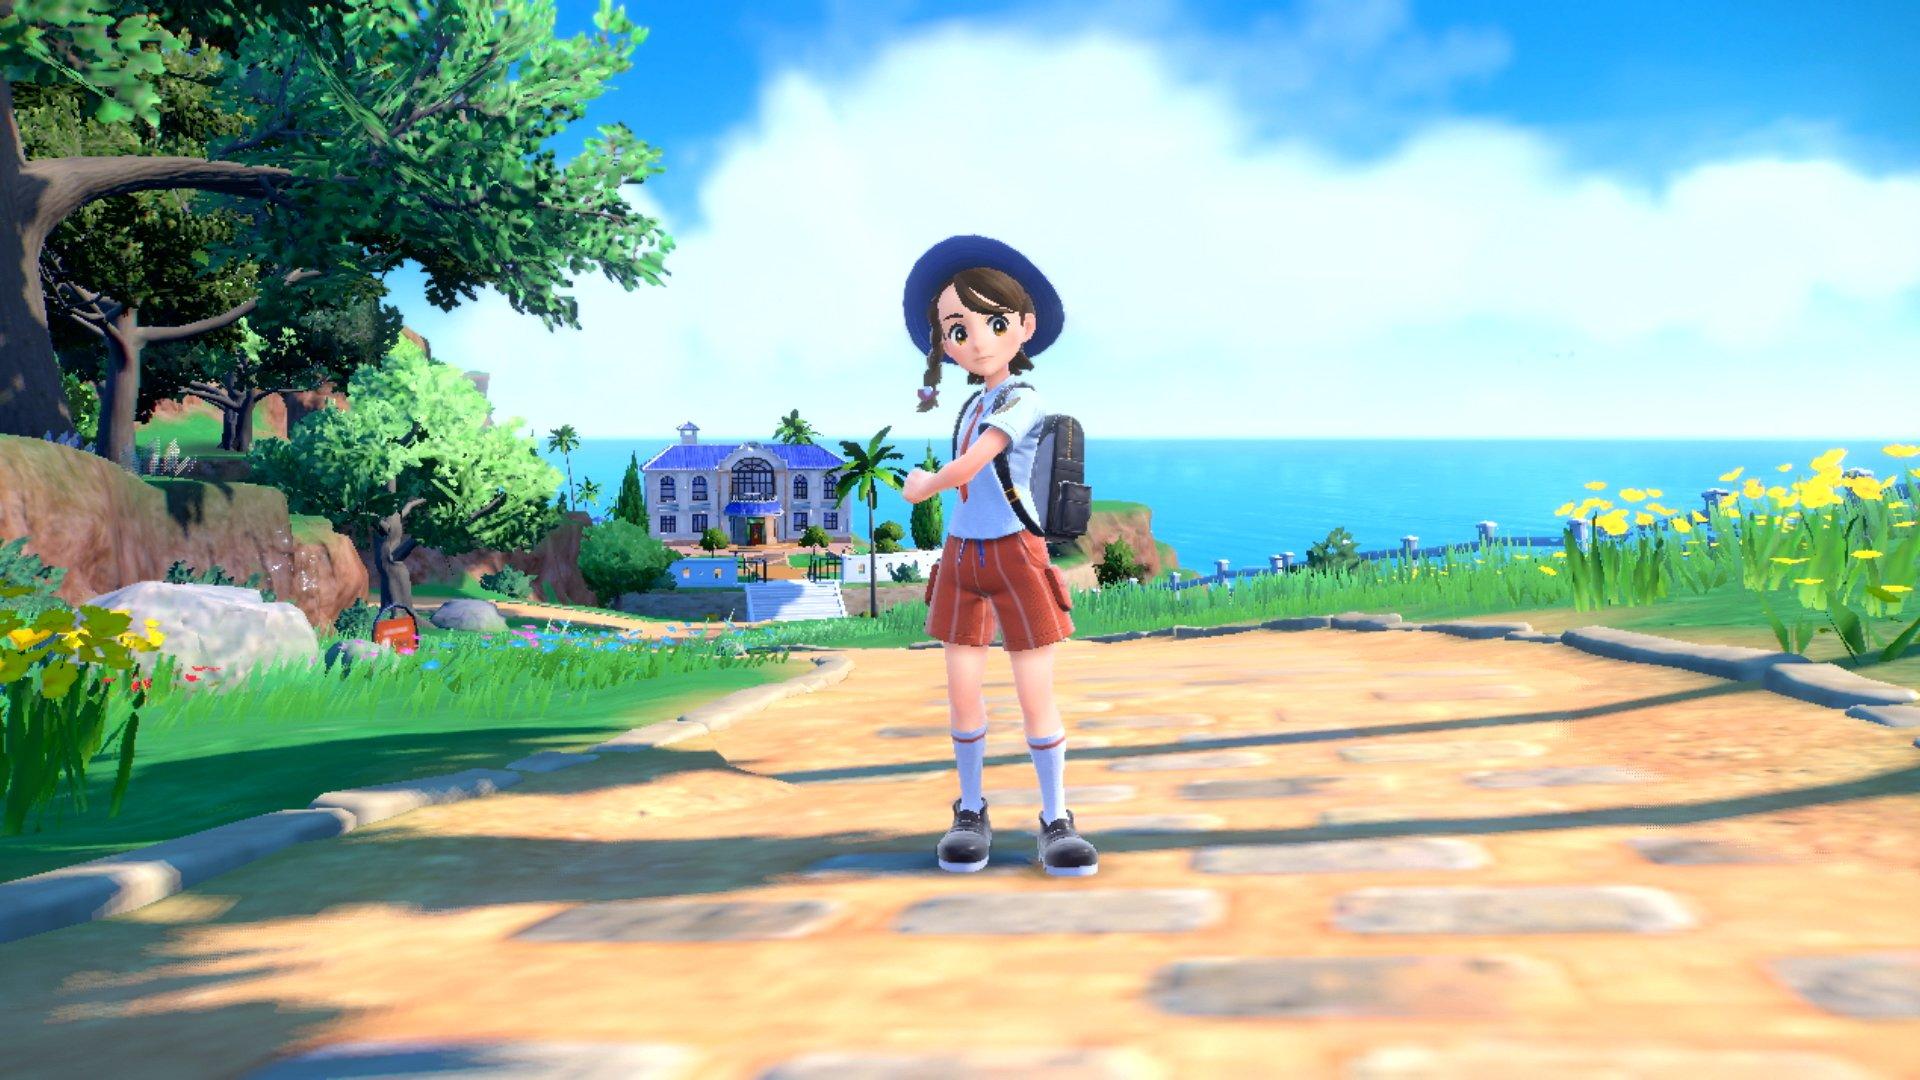 Pokémon Scarlet and Violet Review - Review - Nintendo World Report